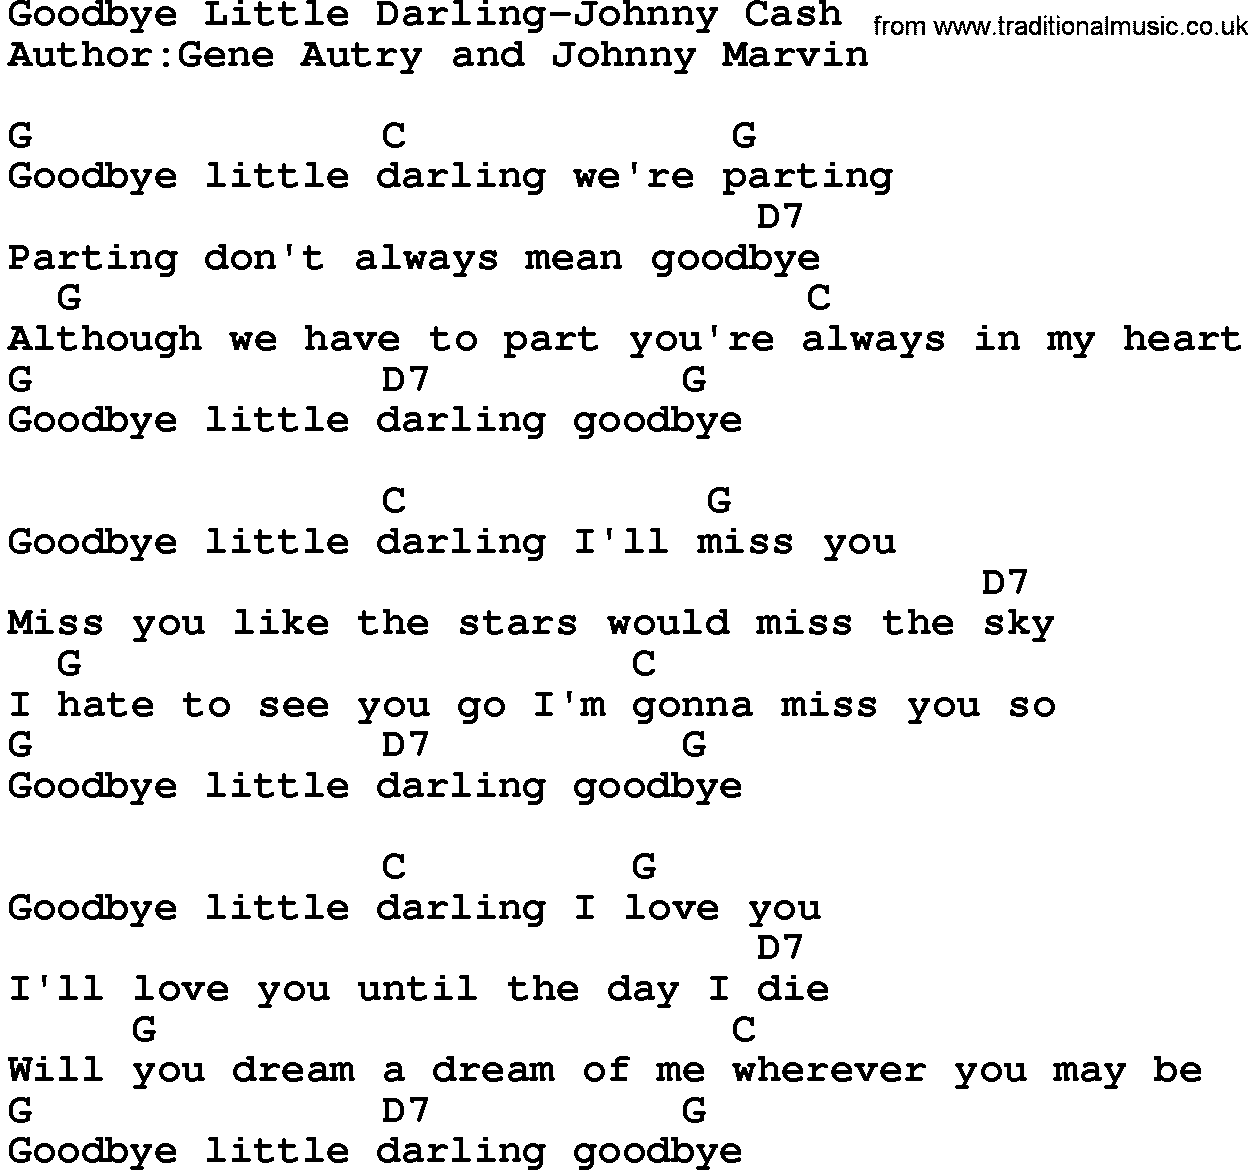 Country music song: Goodbye Little Darling-Johnny Cash lyrics and chords